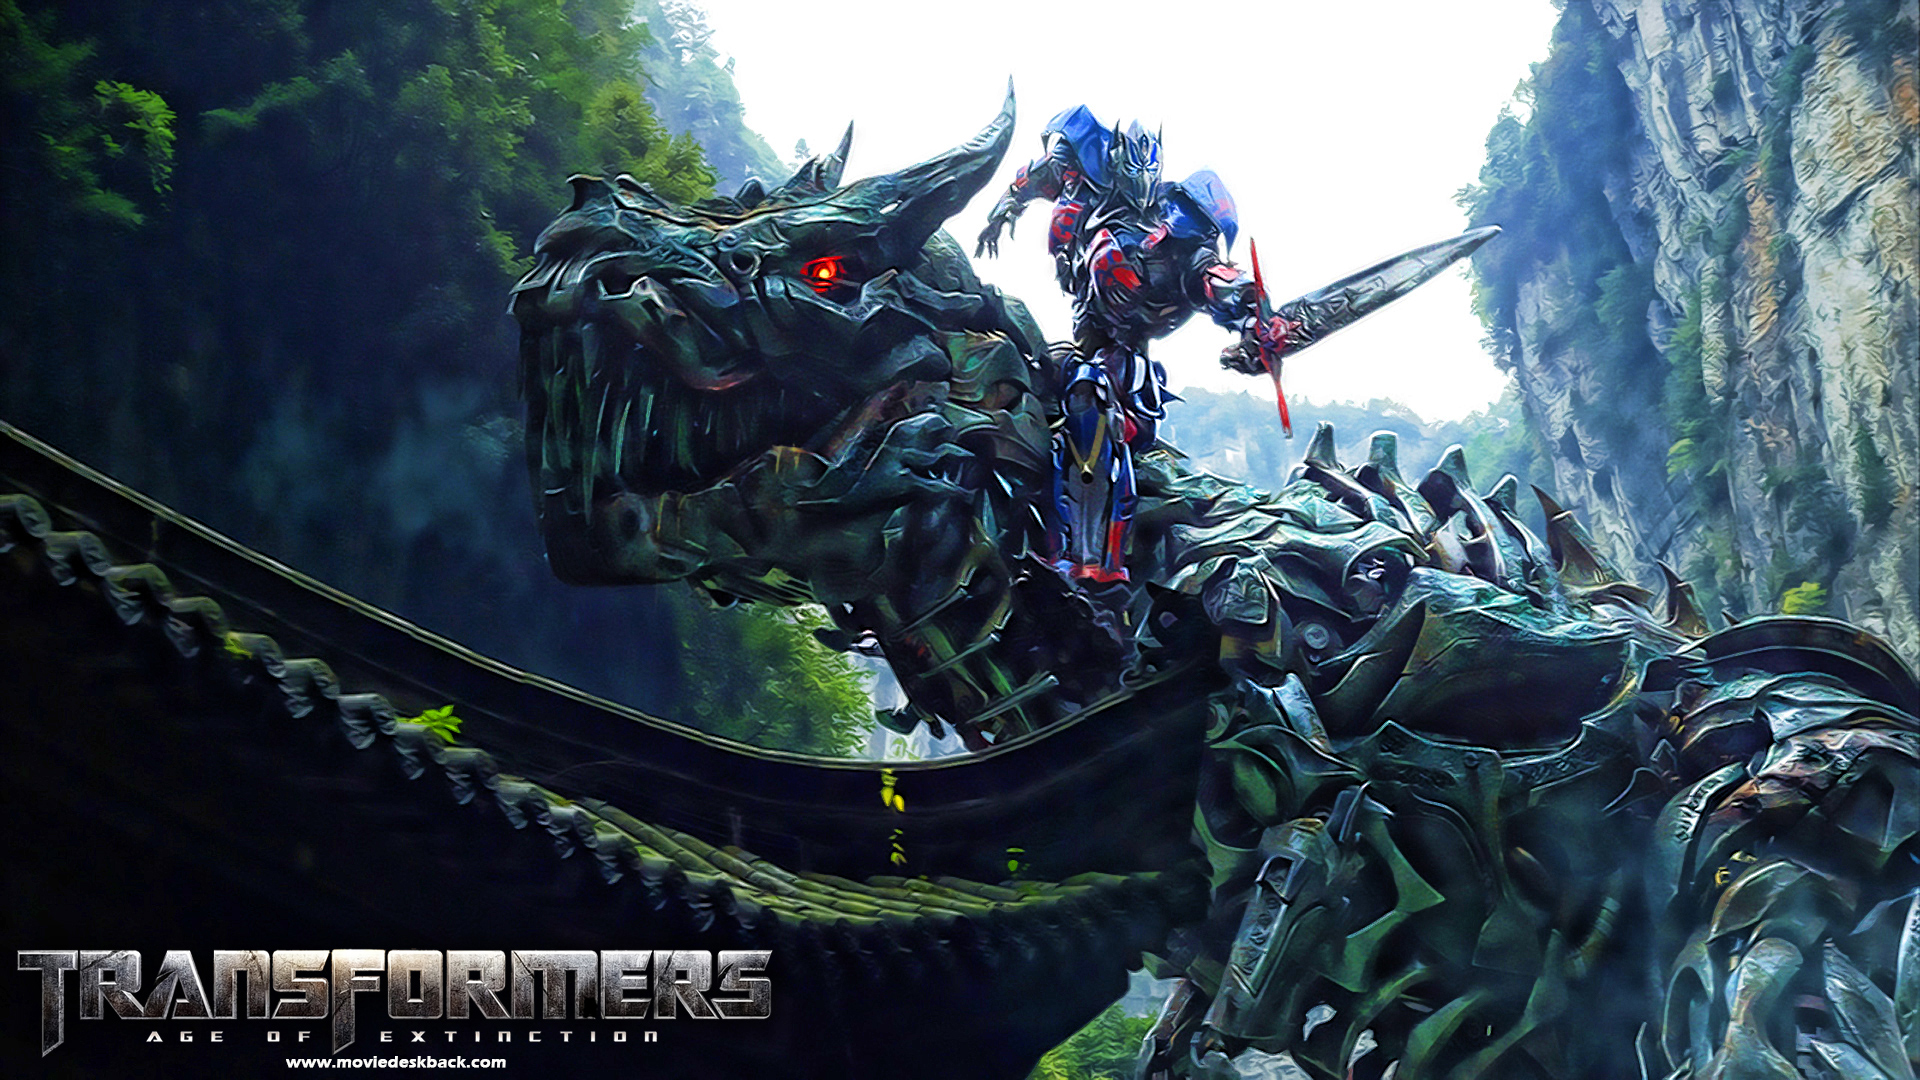 Transformers Age of Extinction poster and a wallpaper   Movie